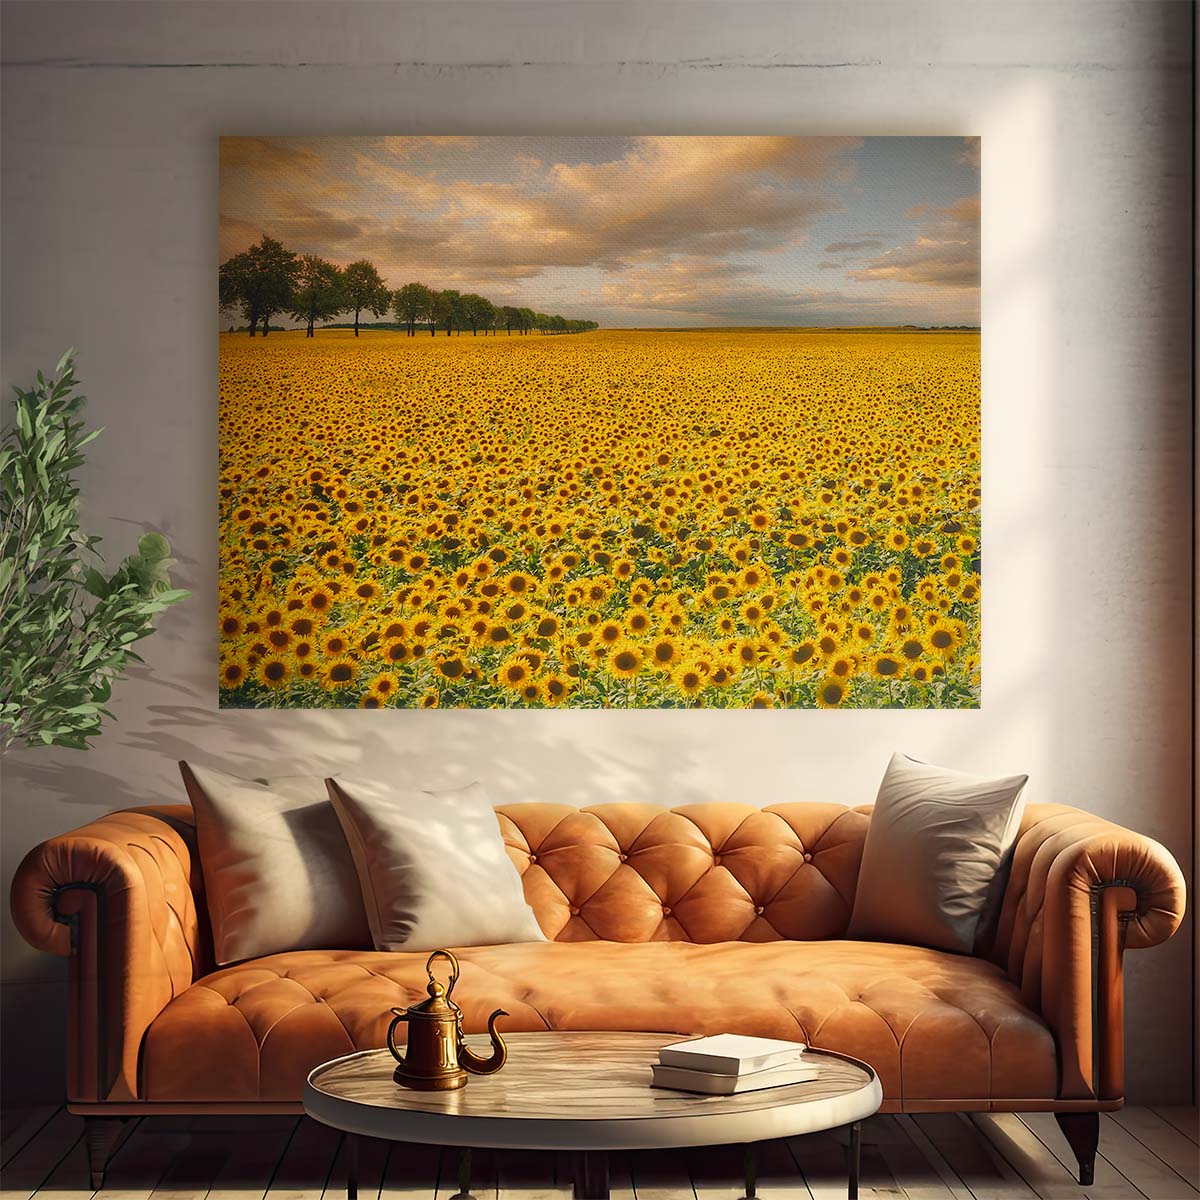 Sunflower Meadow Sunset Polish Countryside Wall Art by Luxuriance Designs. Made in USA.